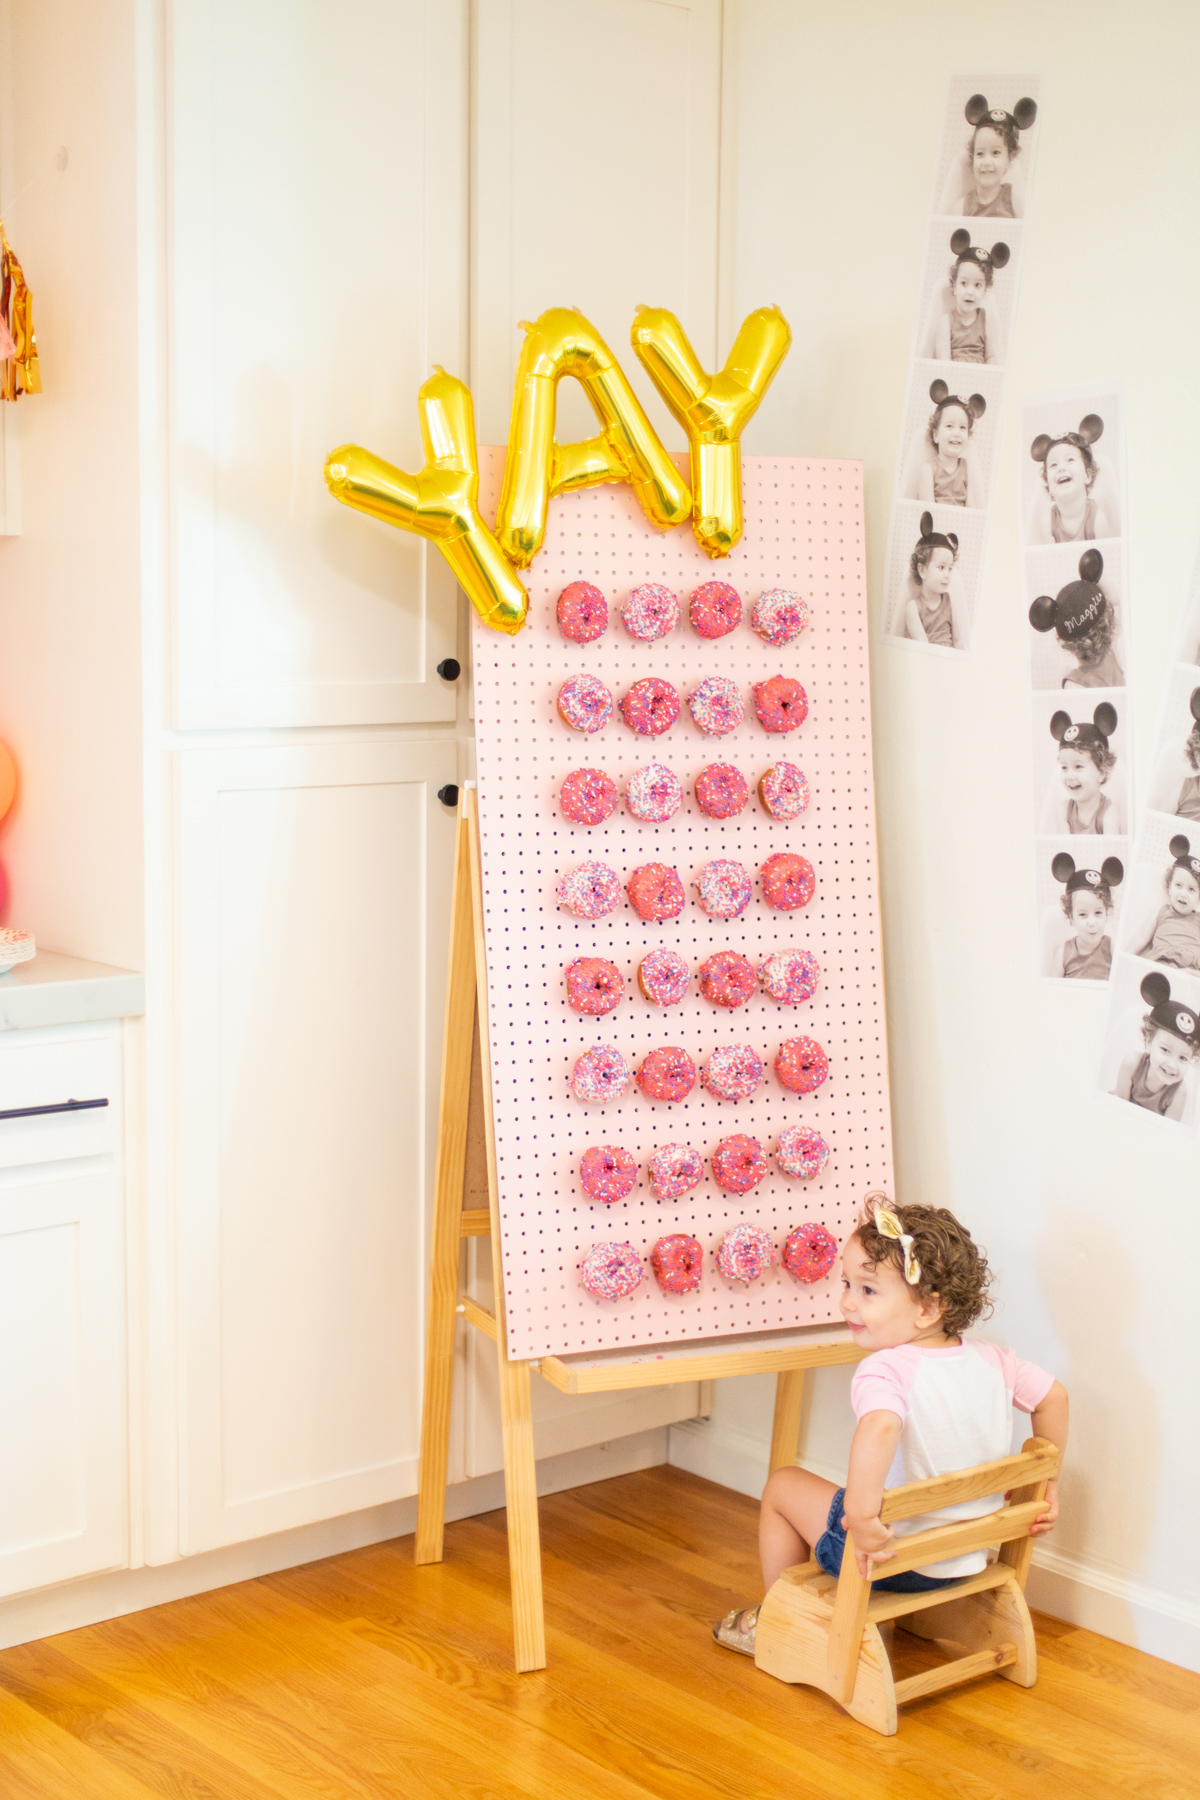 DIY donut wall with letter balloons and pink donuts